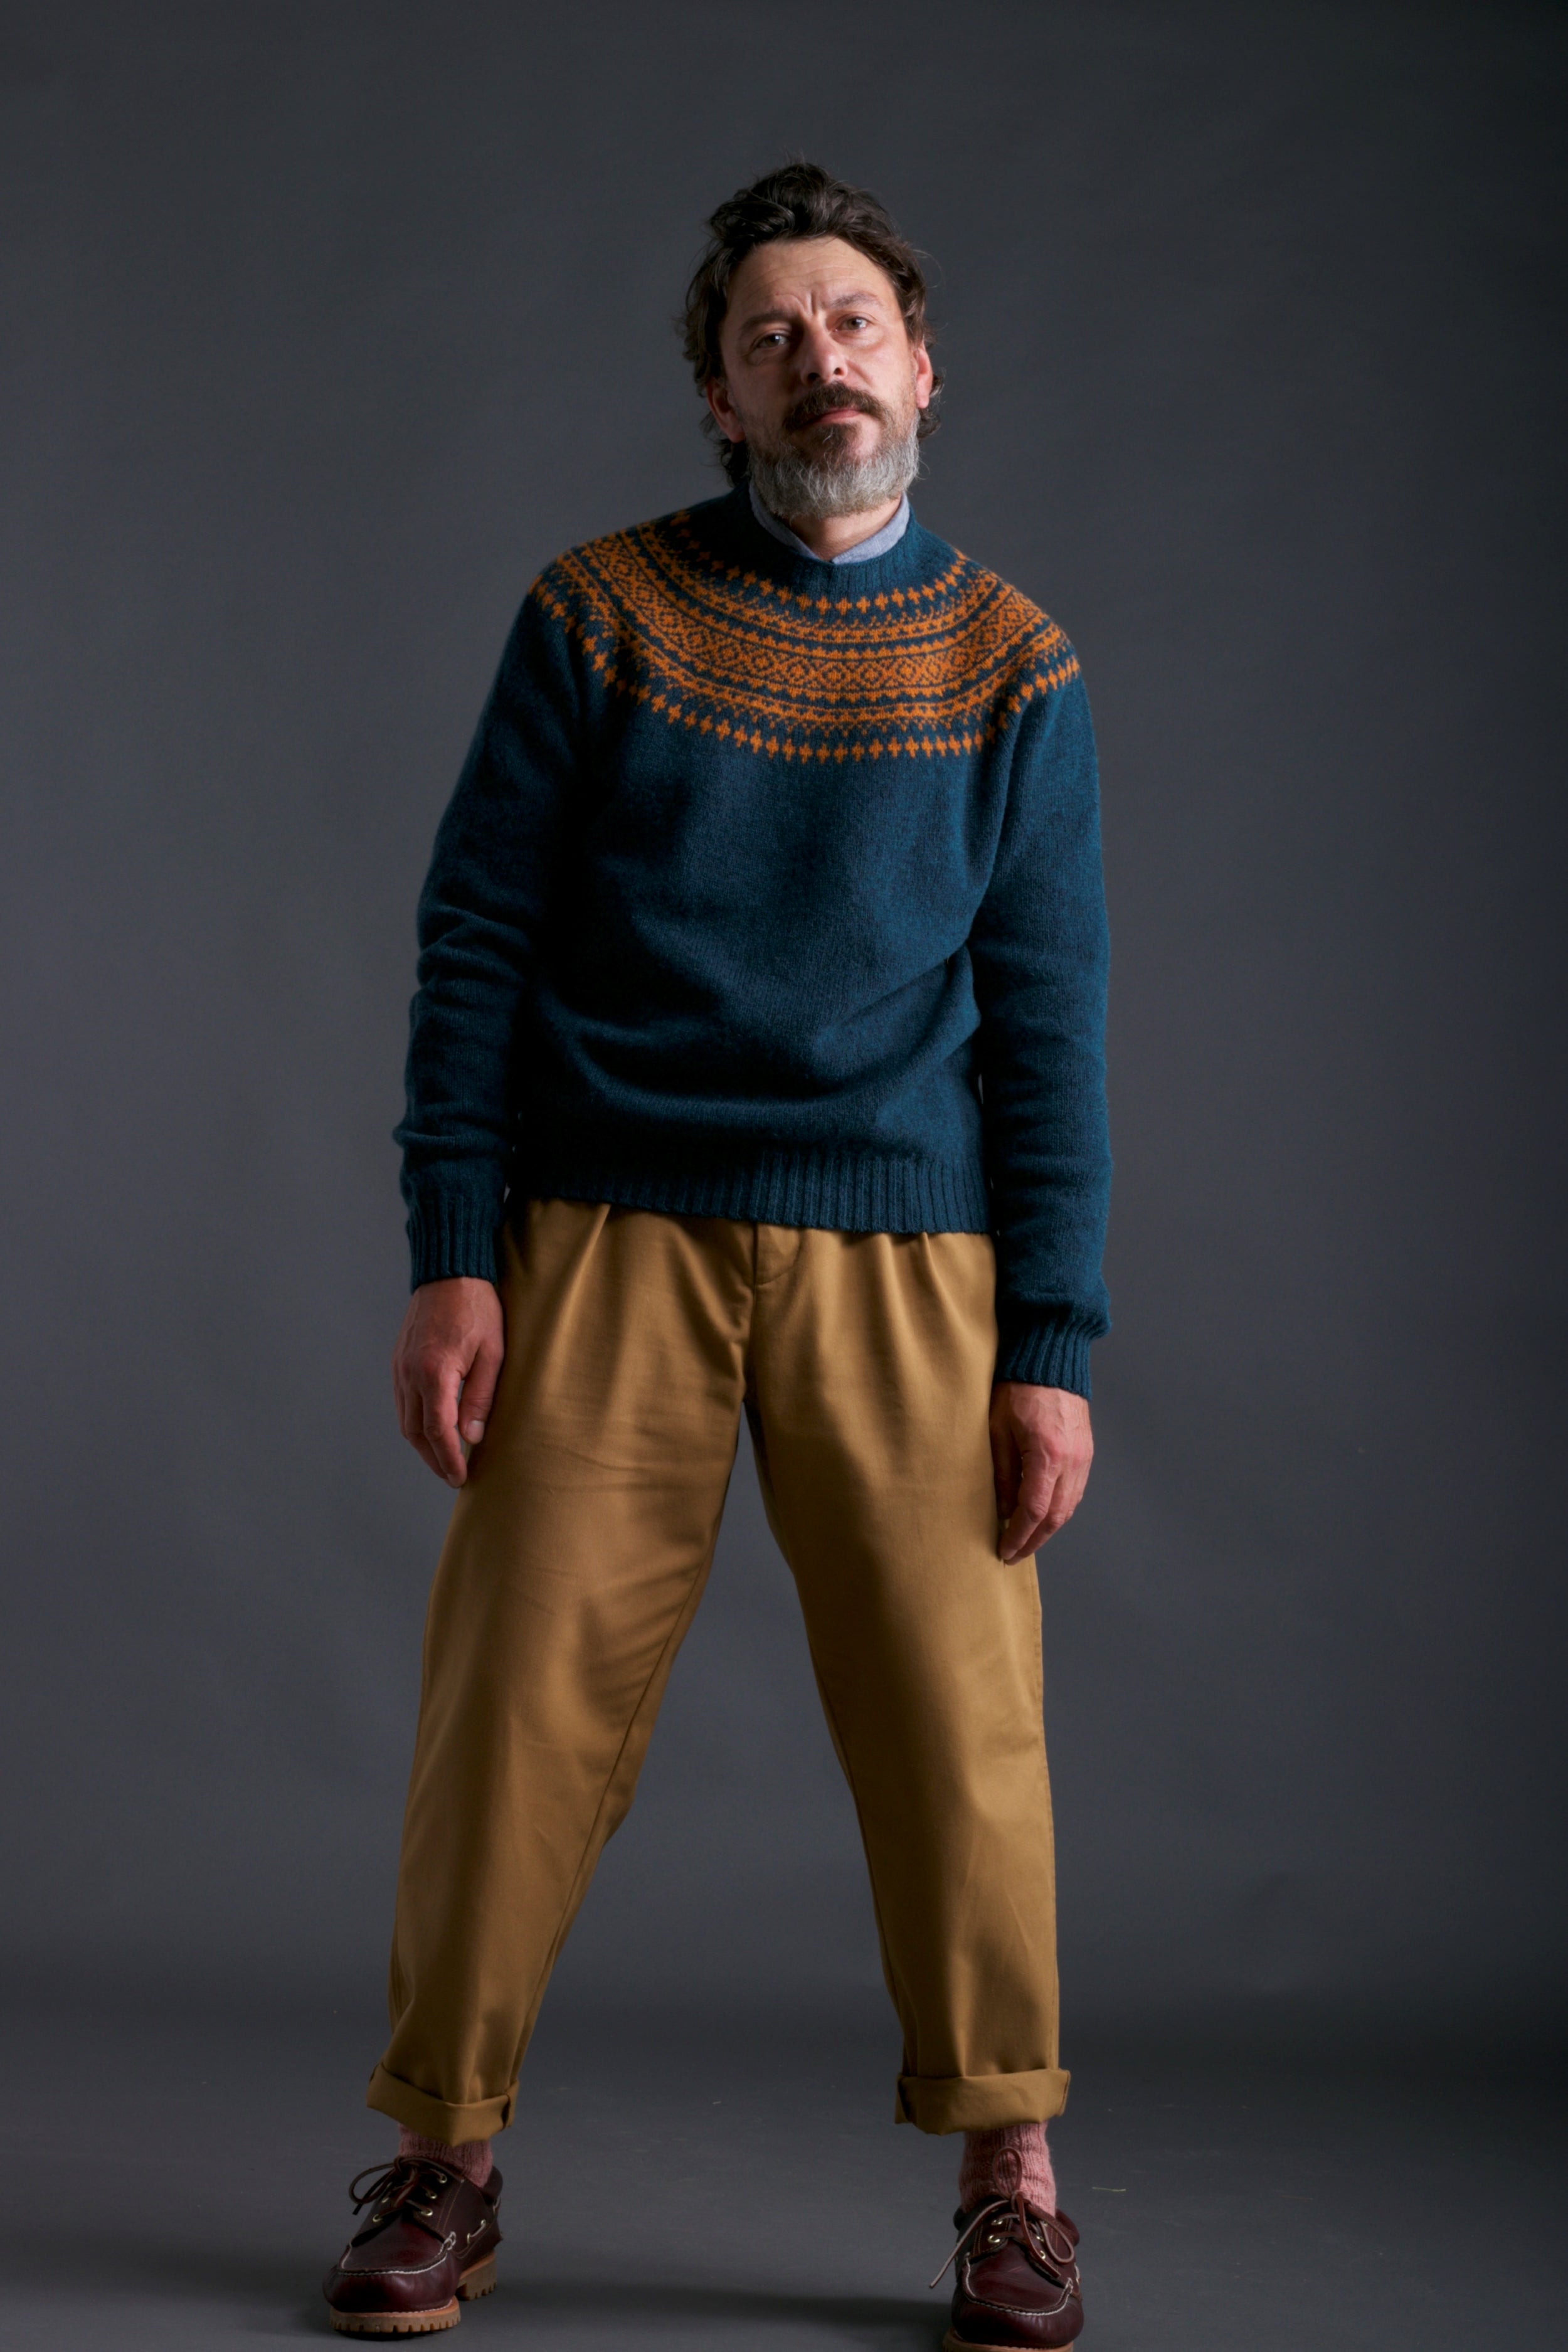 Man wears Carrier Company Classic Trouser in Tan and Shetland Lambswool Yoke Jumper in Ginger & Teal